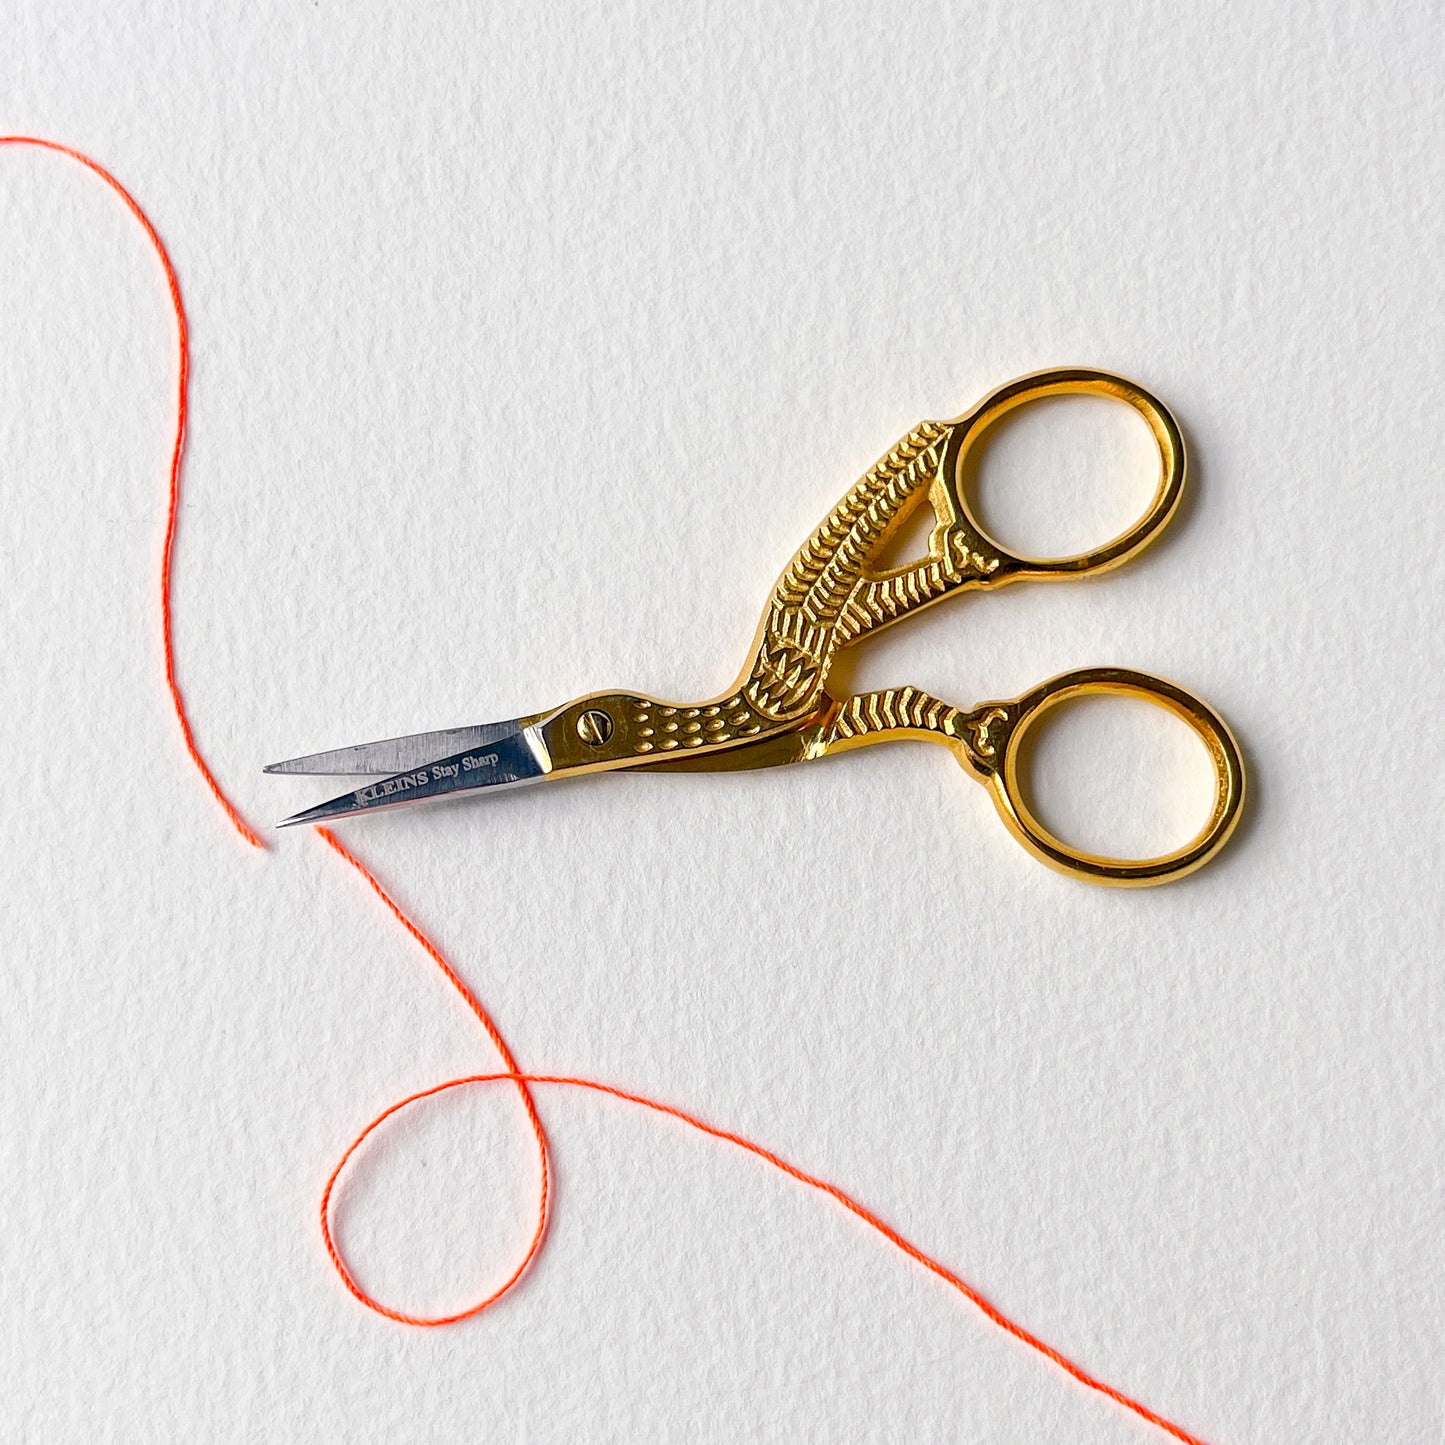 Gold stork embroidery scissors, perfect sewing tool for the professional sewist or the home dressmaker.